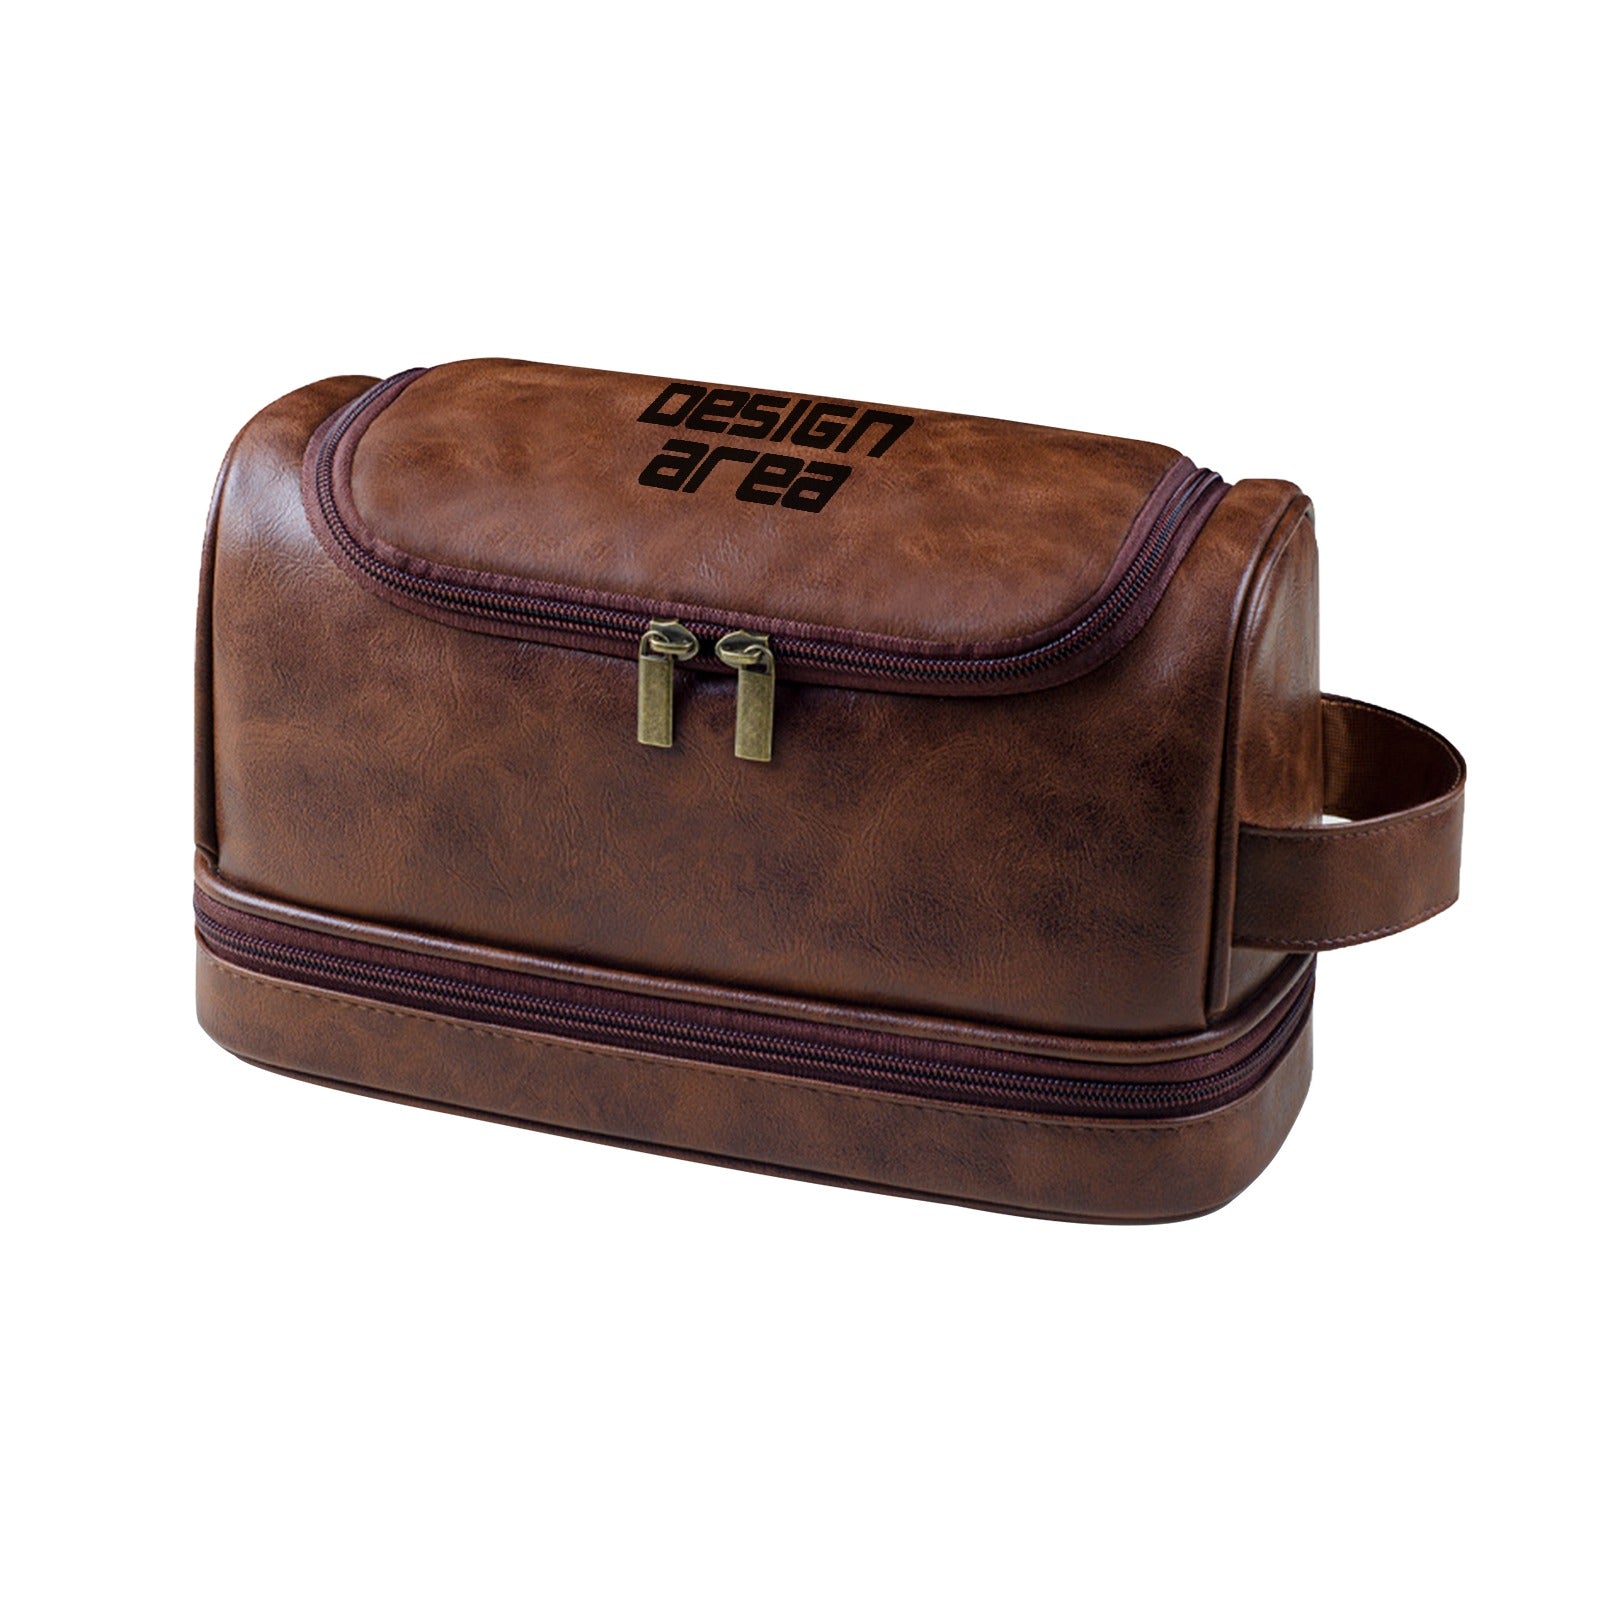 Customizable Faux-Leather Toiletry Bag (Top Engraving)